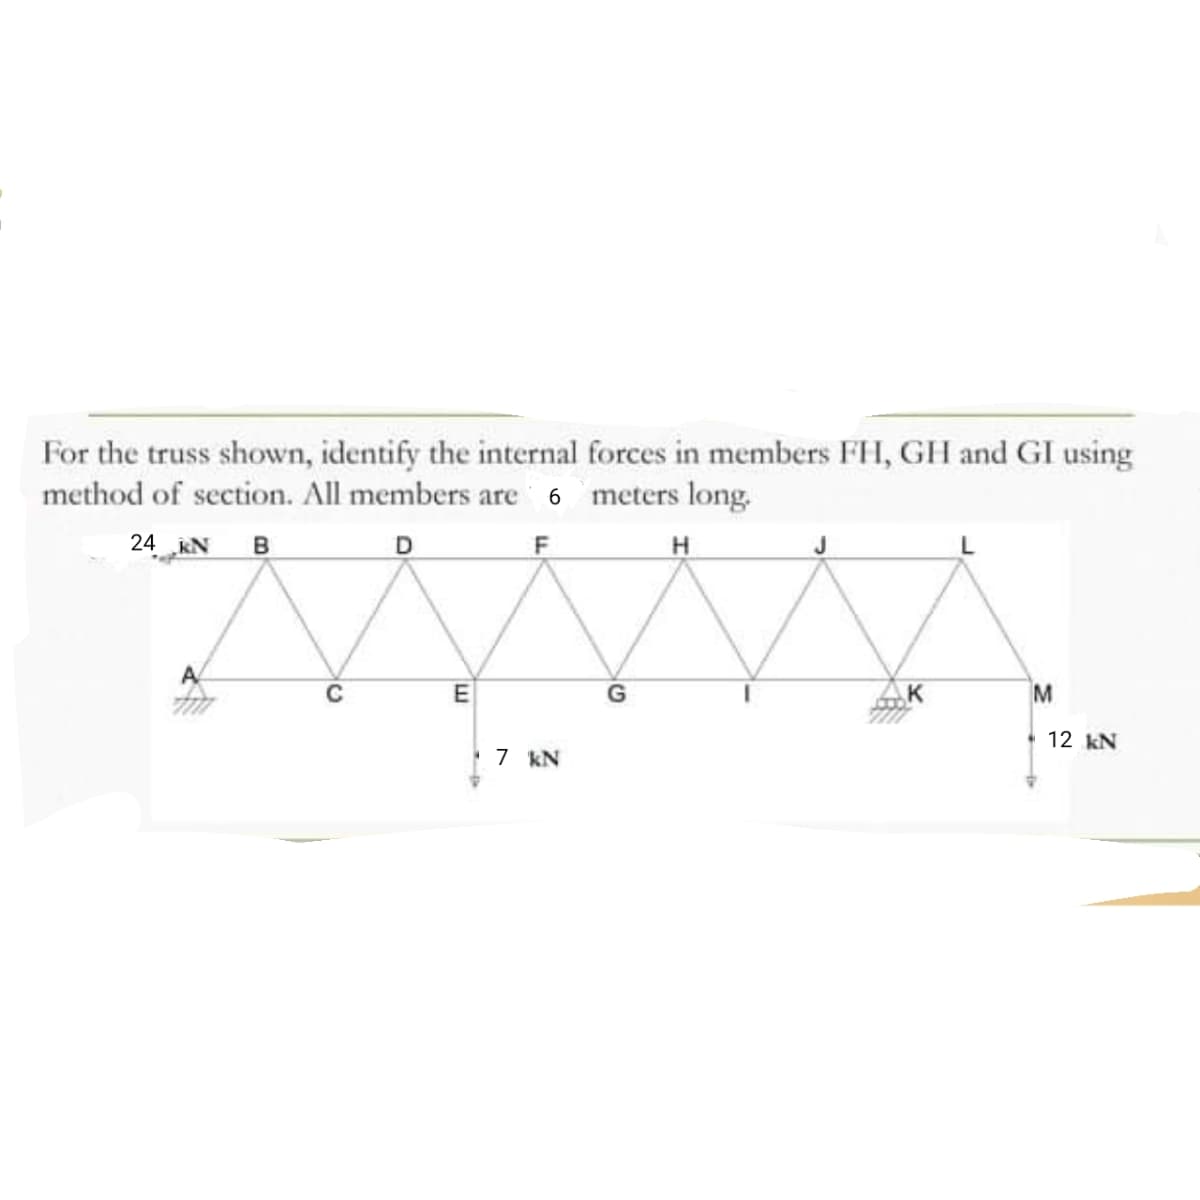 For the truss shown, identify the internal forces in members FH, GH and GI using
method of section. All members are 6 meters long.
24 KN
в
D
A
G
K
M
12 kN
7 kN
